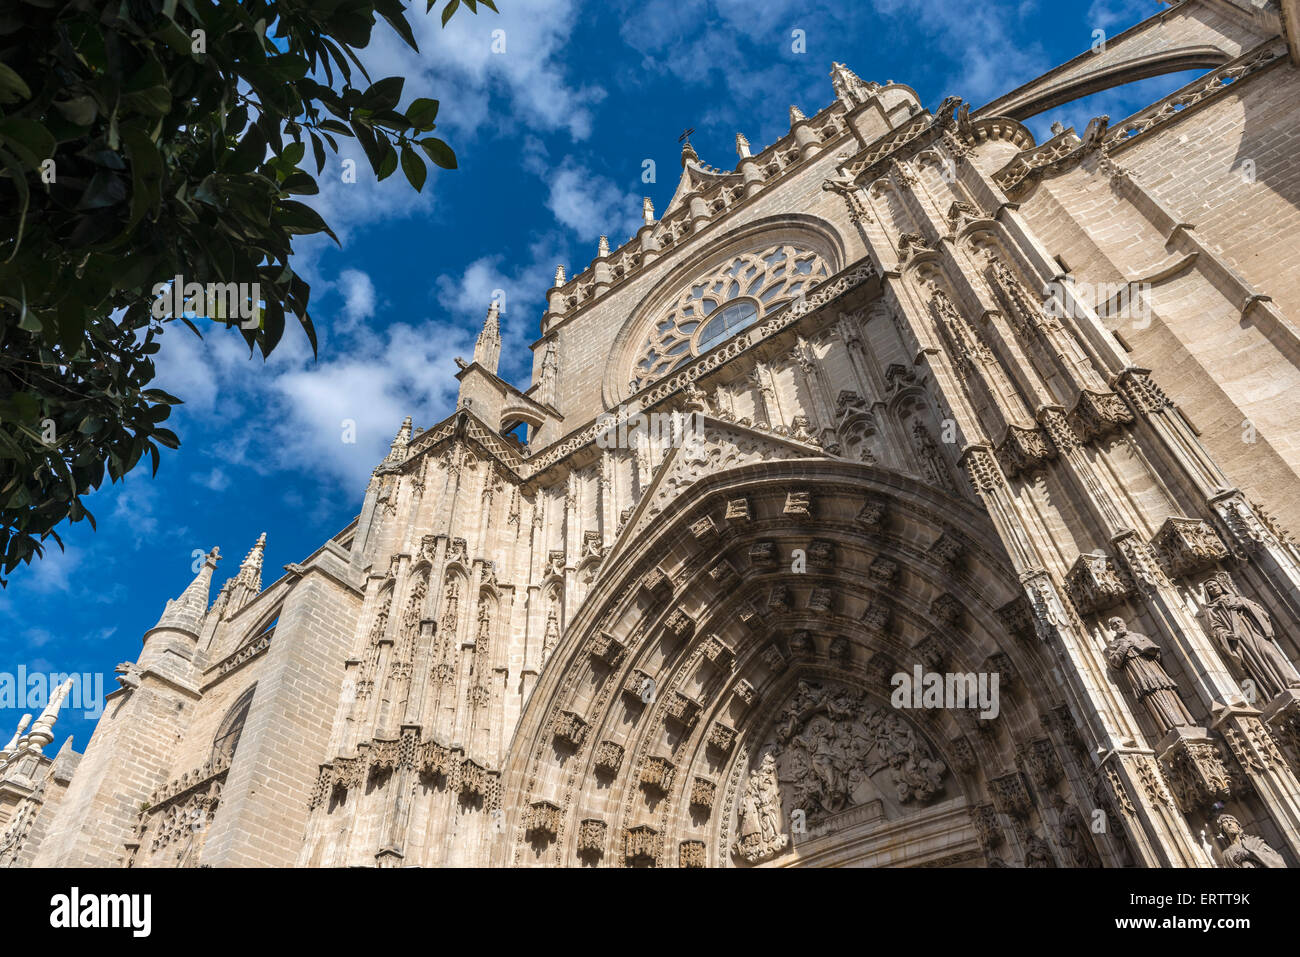 Seville Cathedral, Seville, Spain, Europe Stock Photo